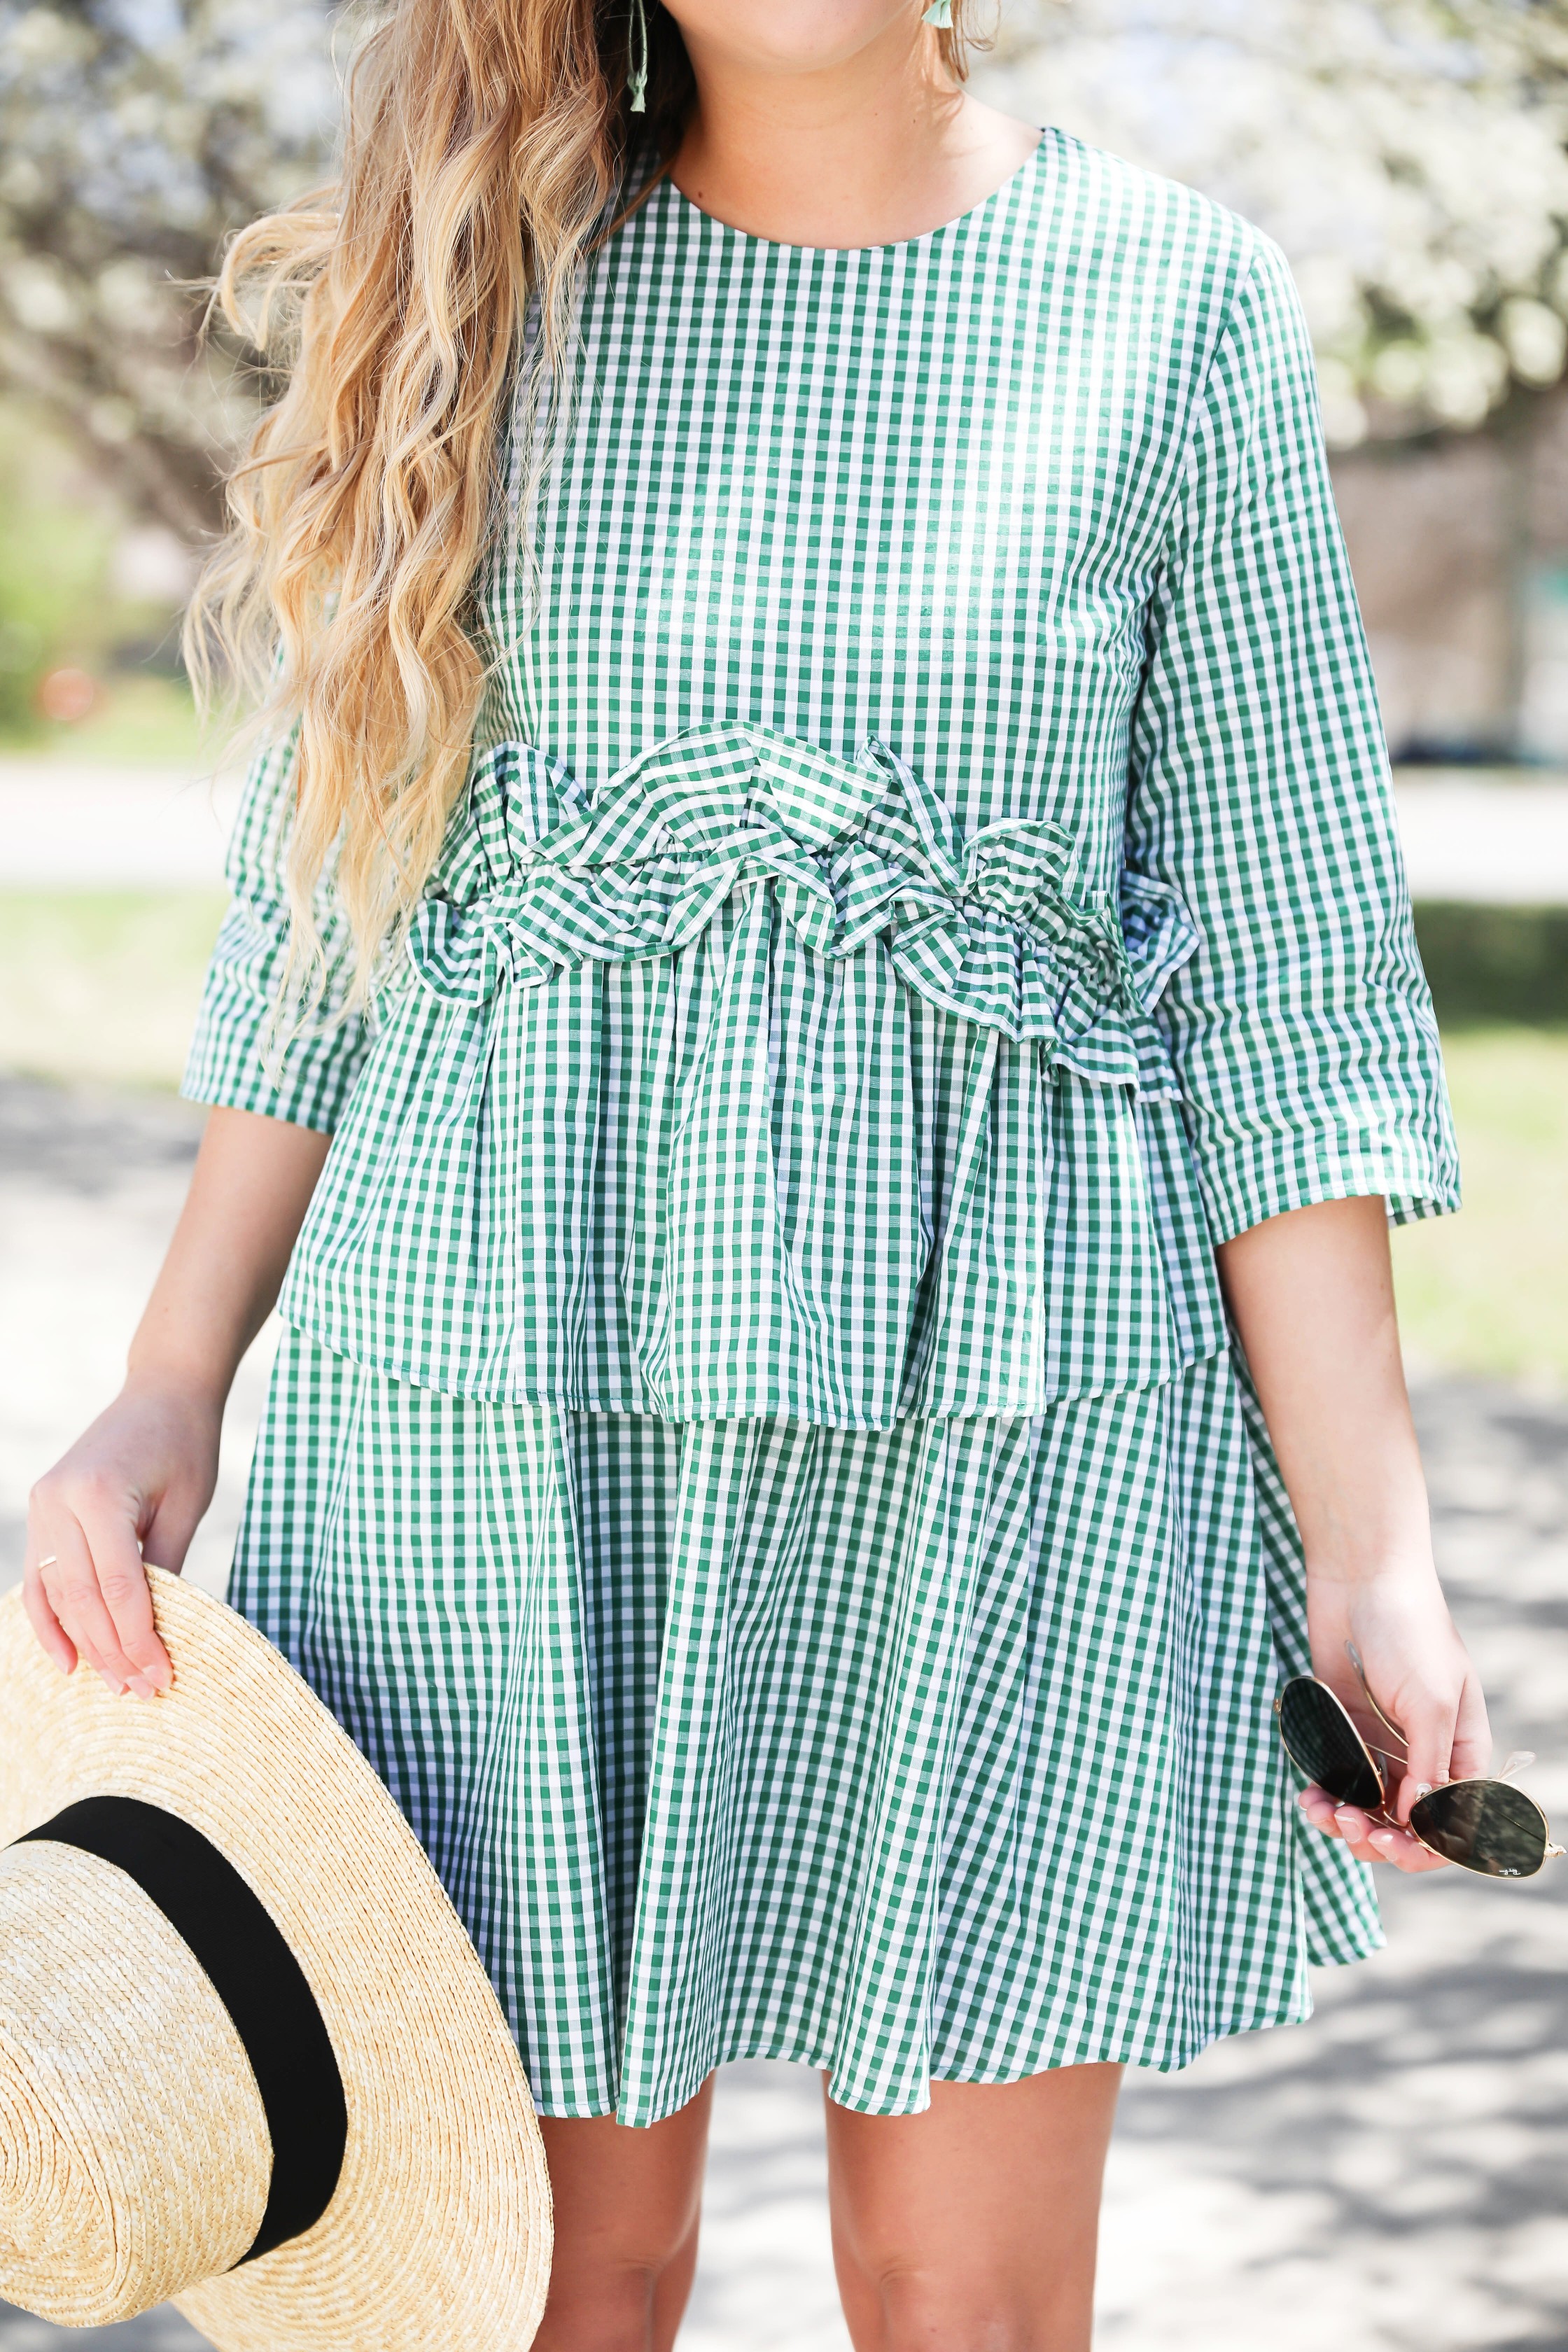 Green gingham dress perfect for spring days or days on the beach! I paired it with a straw hat and blue earrings! The most beautiful spring blooming trees were in the background making this spring fashion look perfection! Details on fashion blog daily dose of charm by lauren lindmark